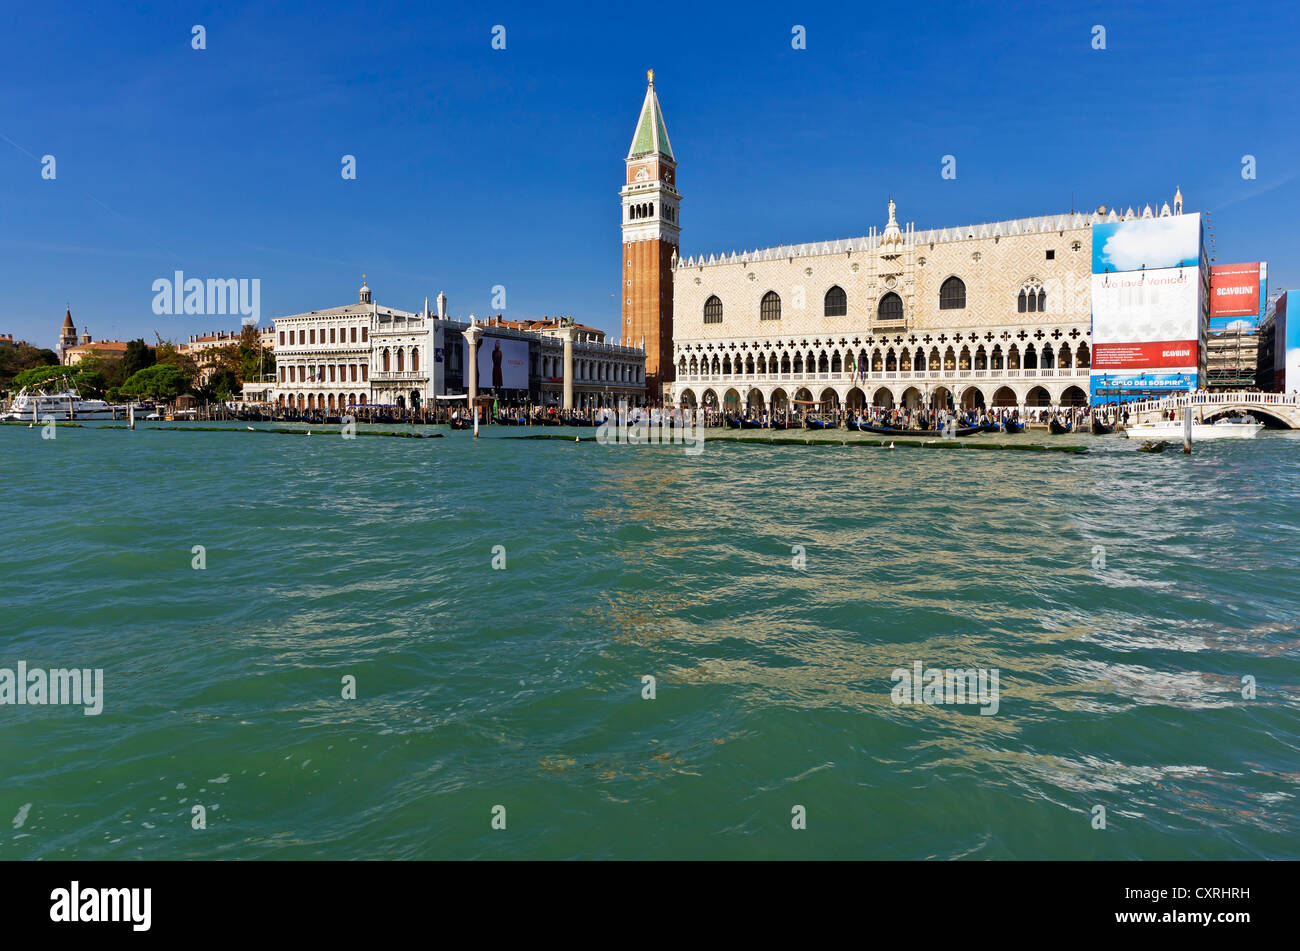 View of the Piazza San Marco, St Mark's Square, from the waterside with the Campanile and the Doge's Palace, Venice, Venezia Stock Photo